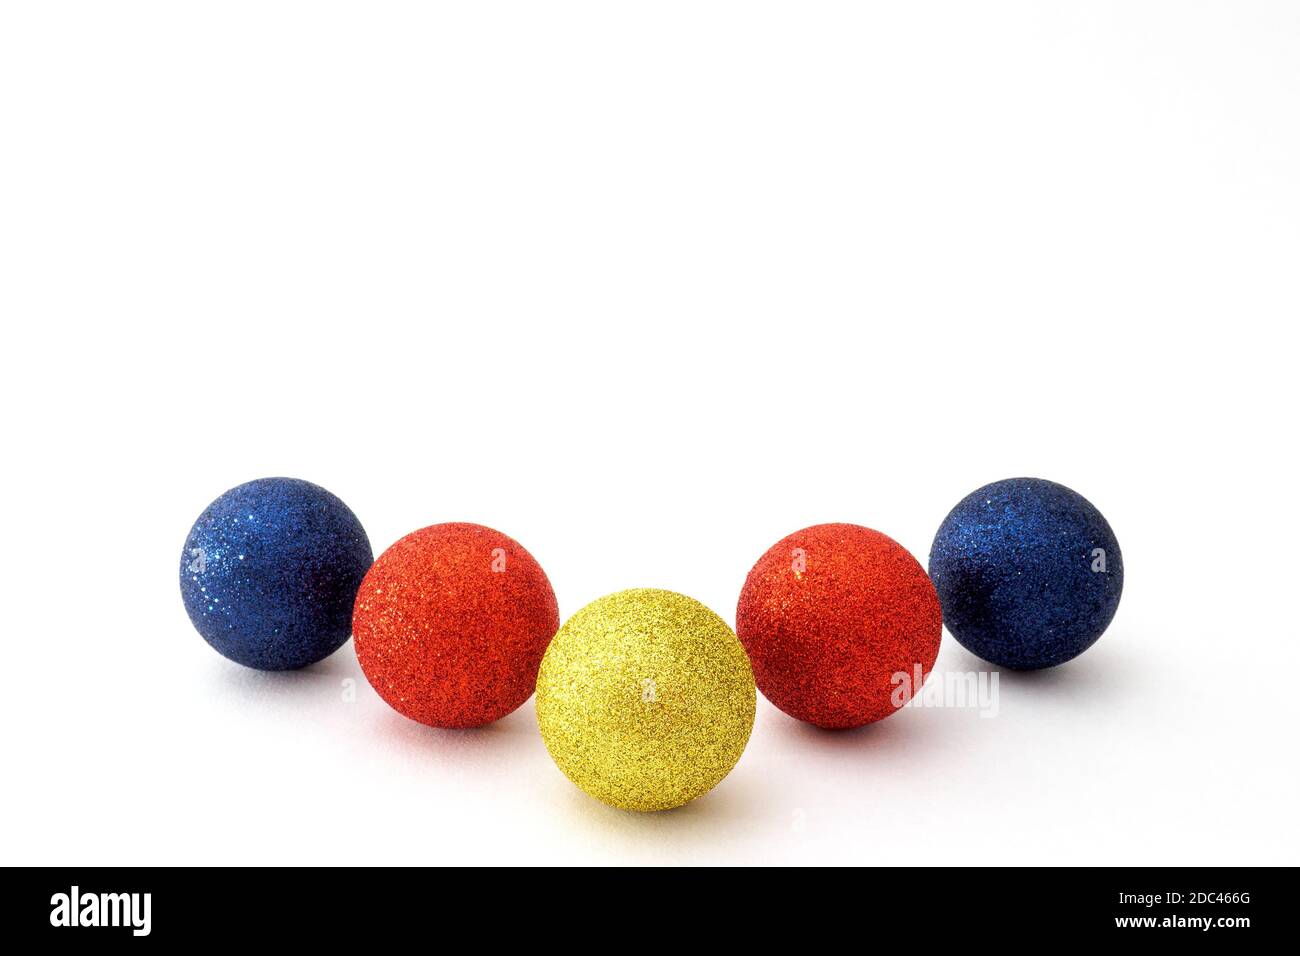 Five Christmas baubles blue, red and yellow color on white background. Selective focus, copy space Stock Photo